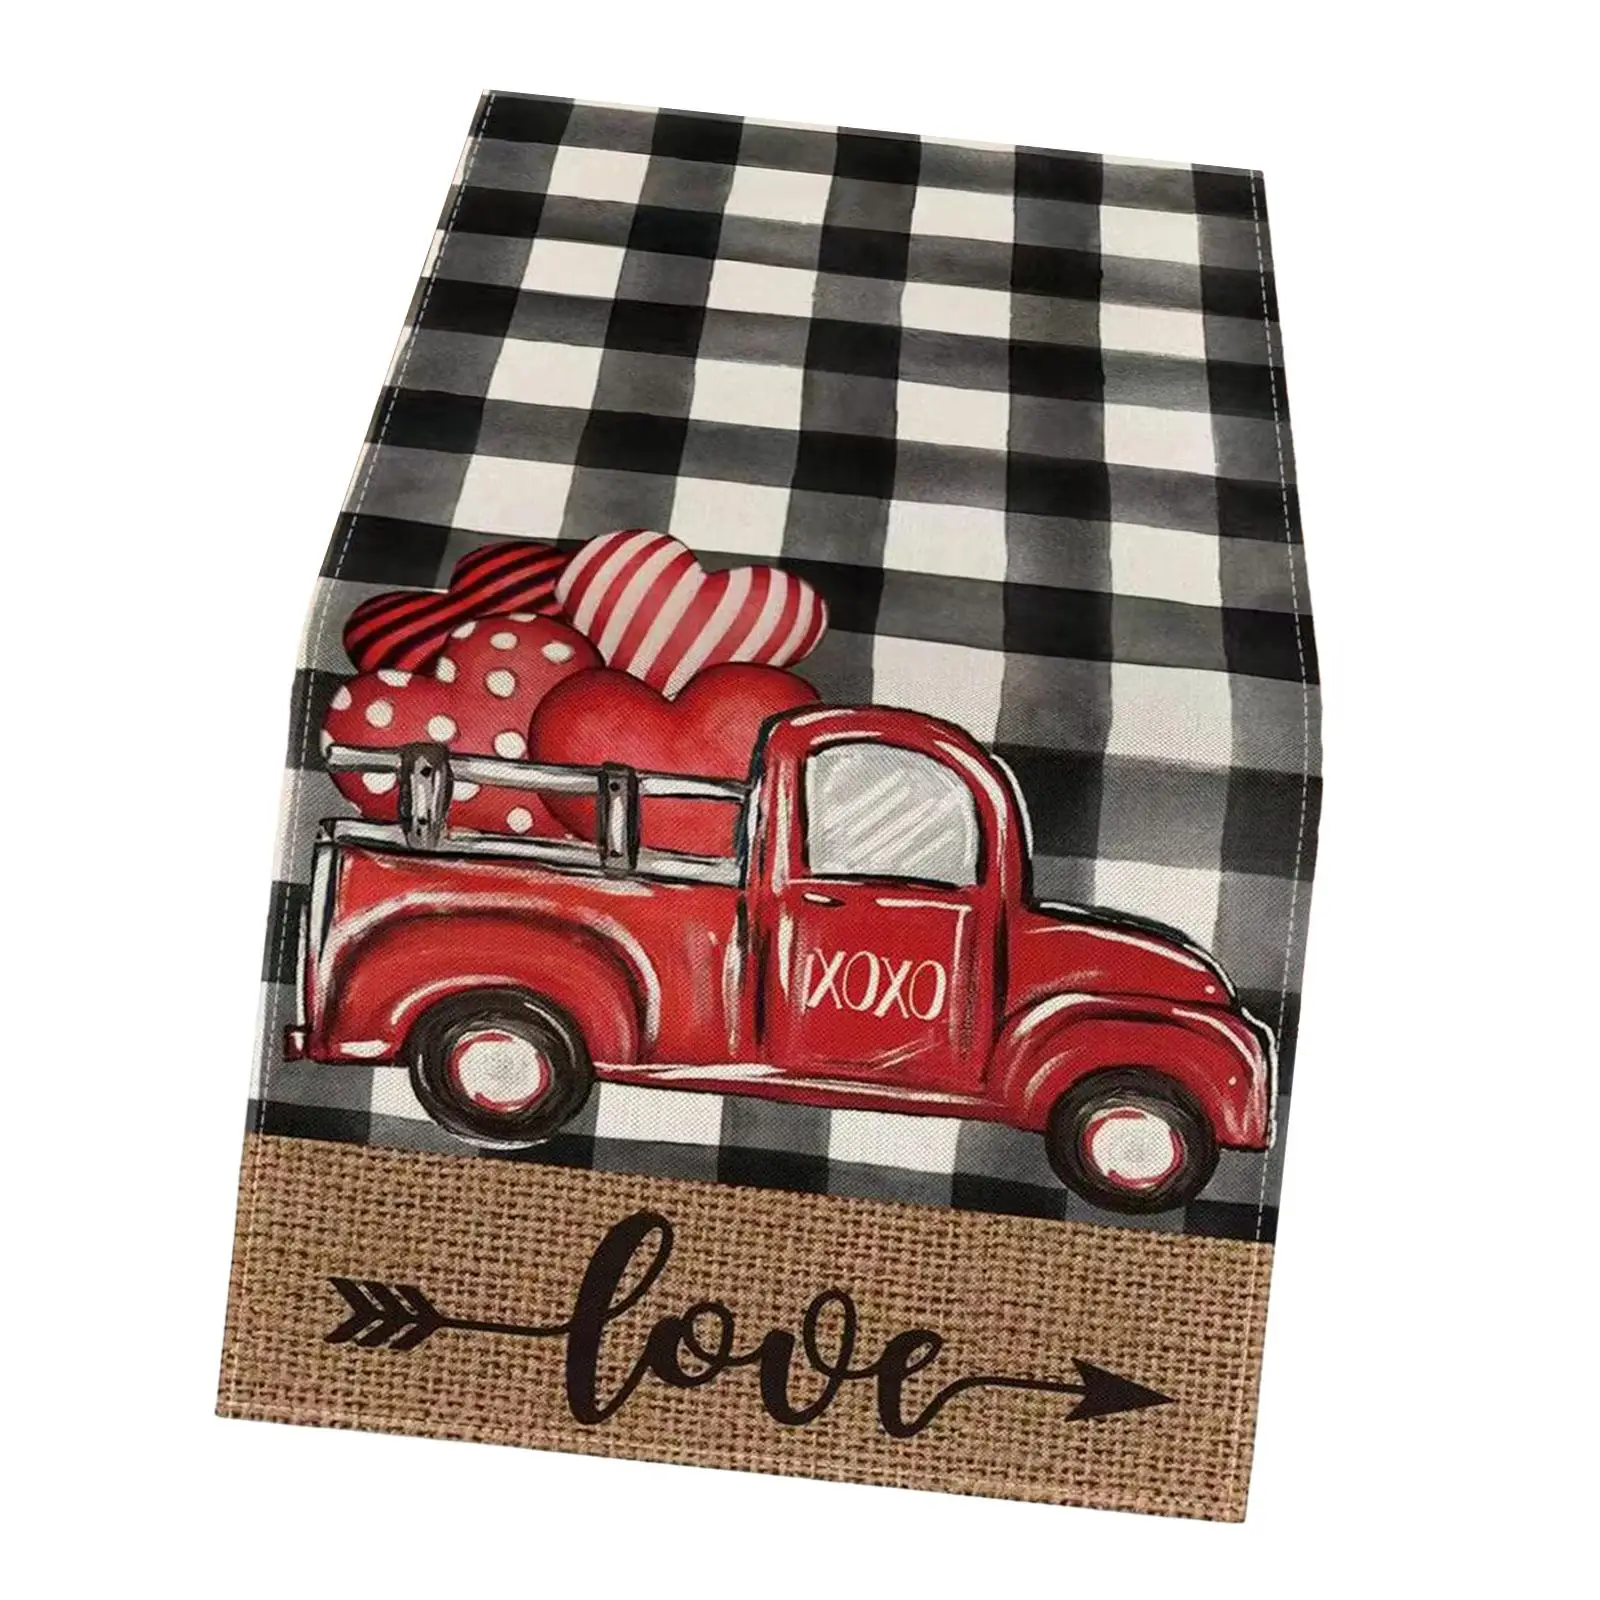 Valentine`s Day Table Runner Decorative 13x72 inch Tablecloth Table Cloth for Anniversary Restaurant Birthday Wedding Christmas